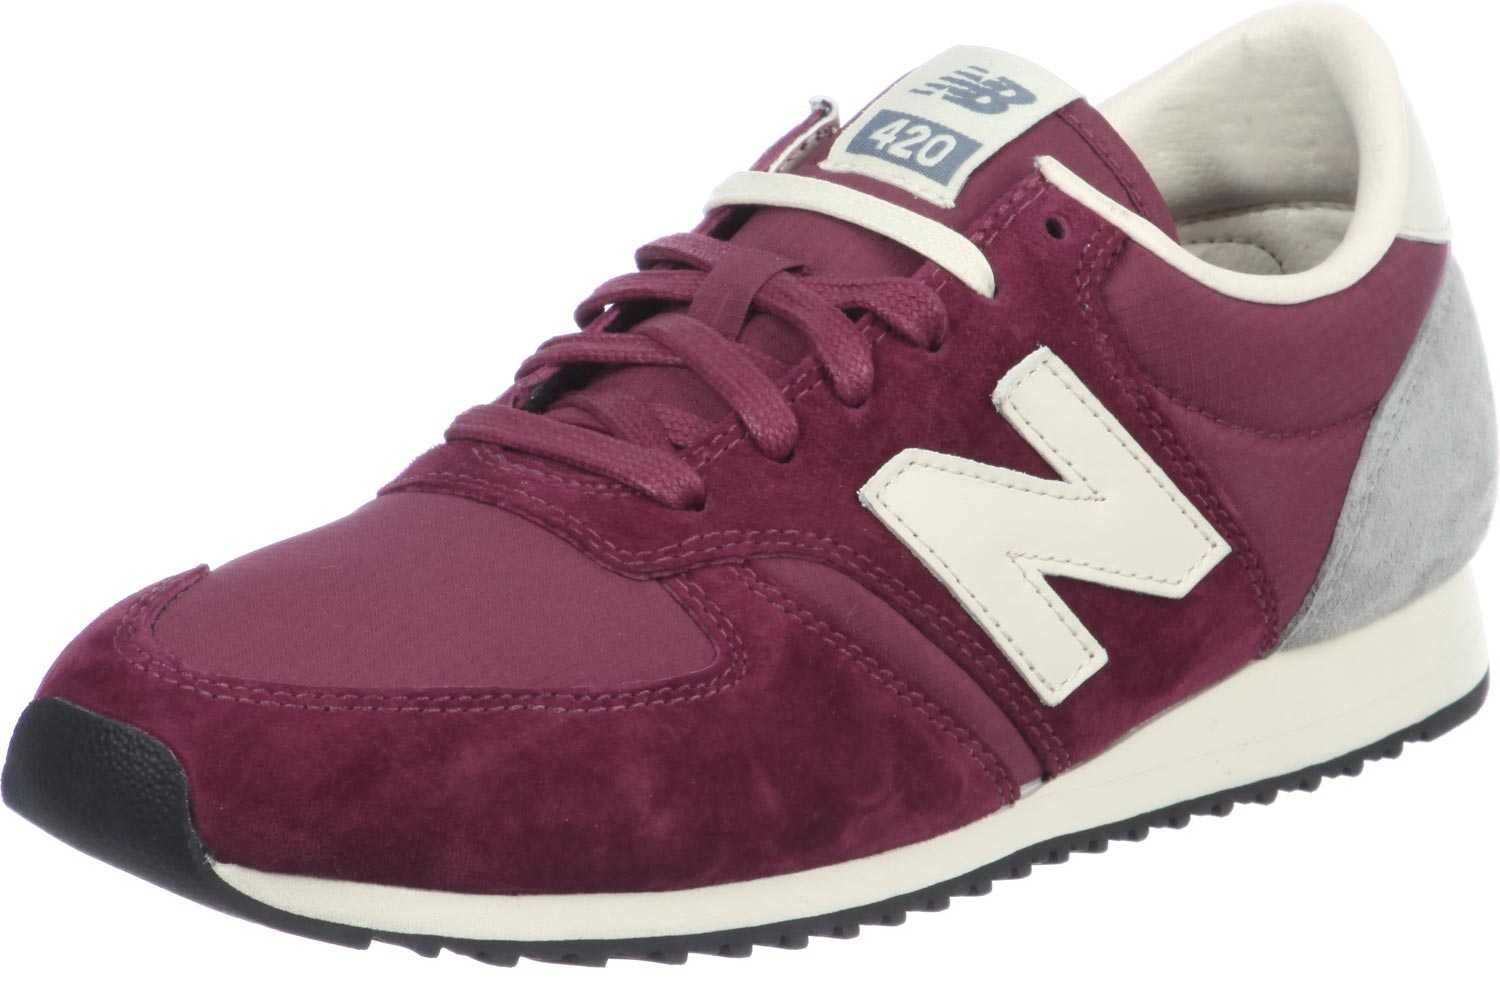 chaussure new balance fille pas cher, Vente Très Pas Cher New Balance u420 Homme Bordeaux Pas Cher [New Balance Shoes]